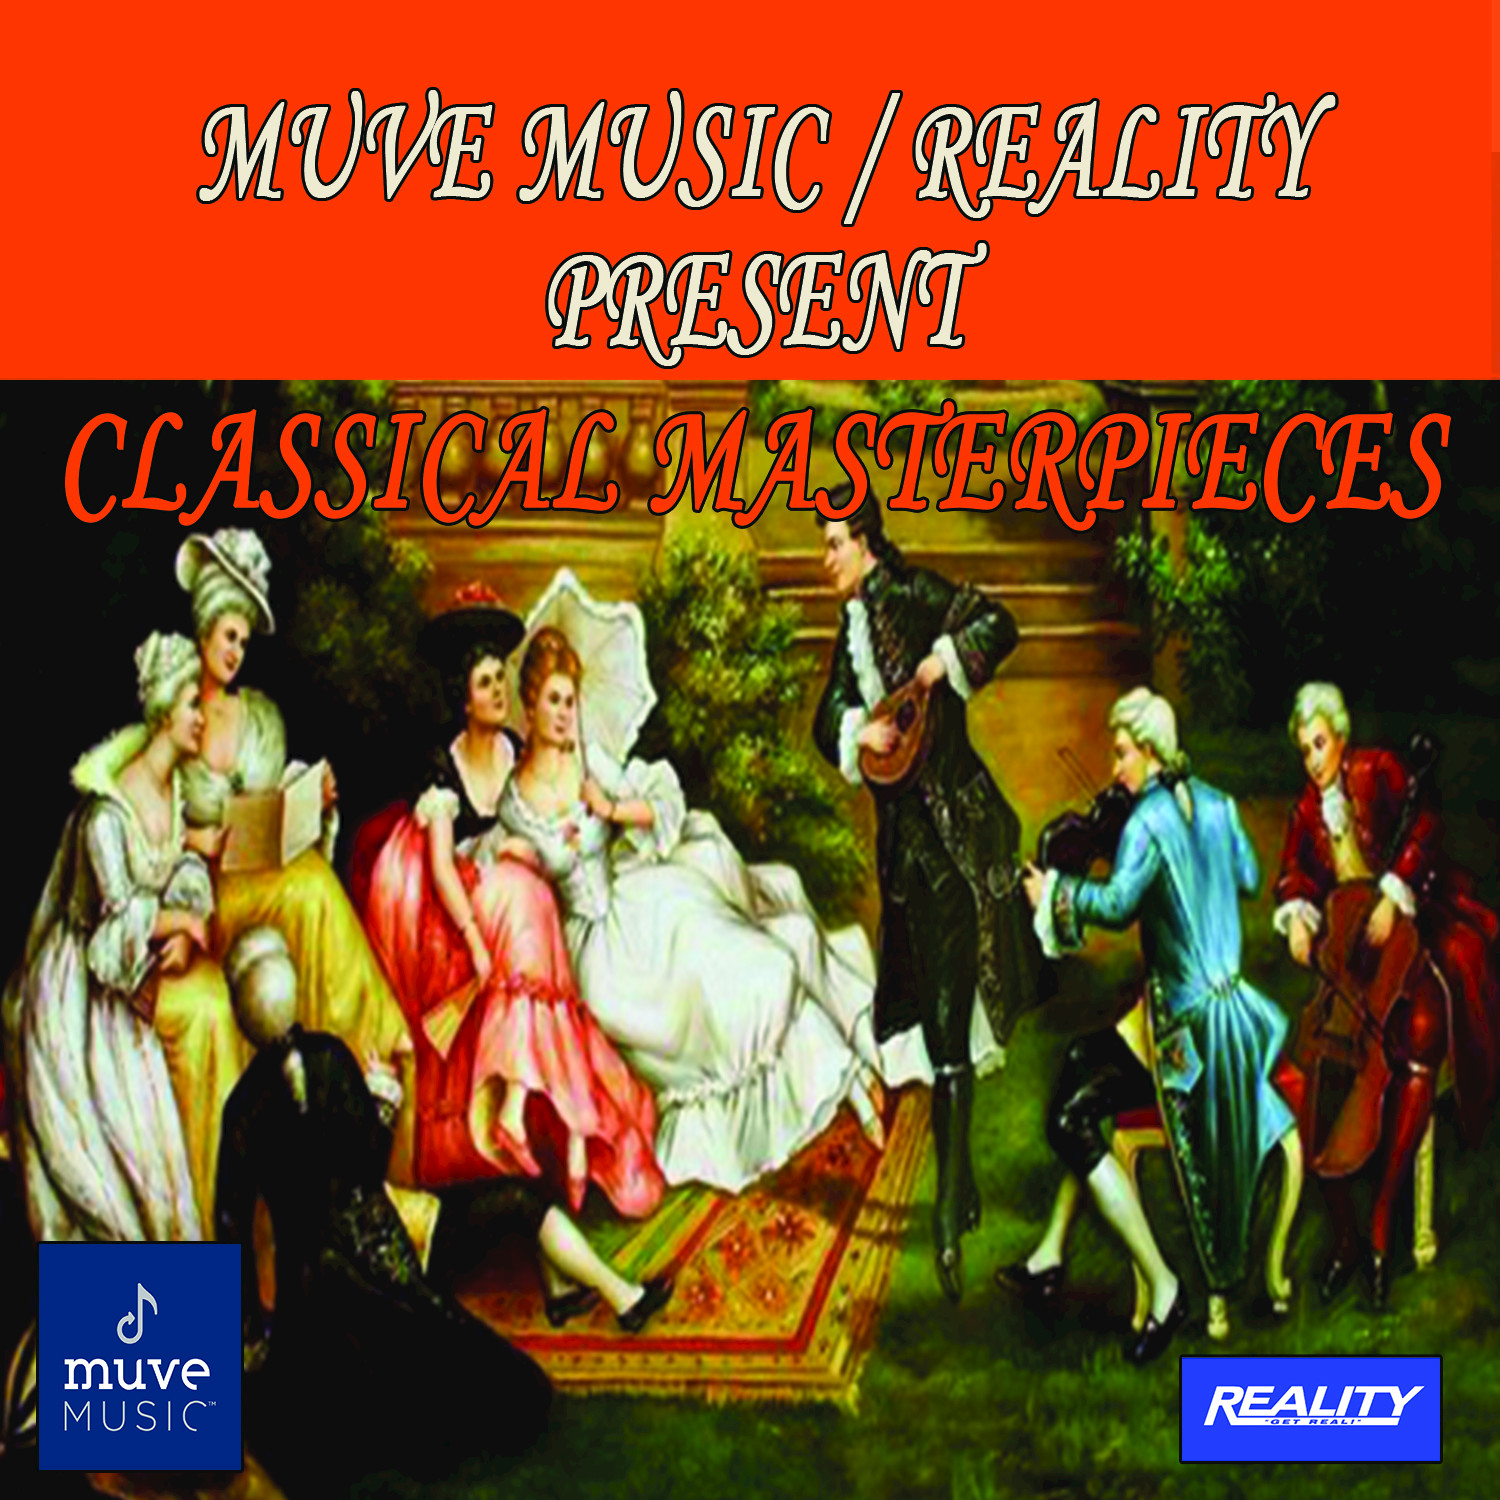 Mozart, Beethoven, Bach, Chopin, Handel: Classical Masterpieces